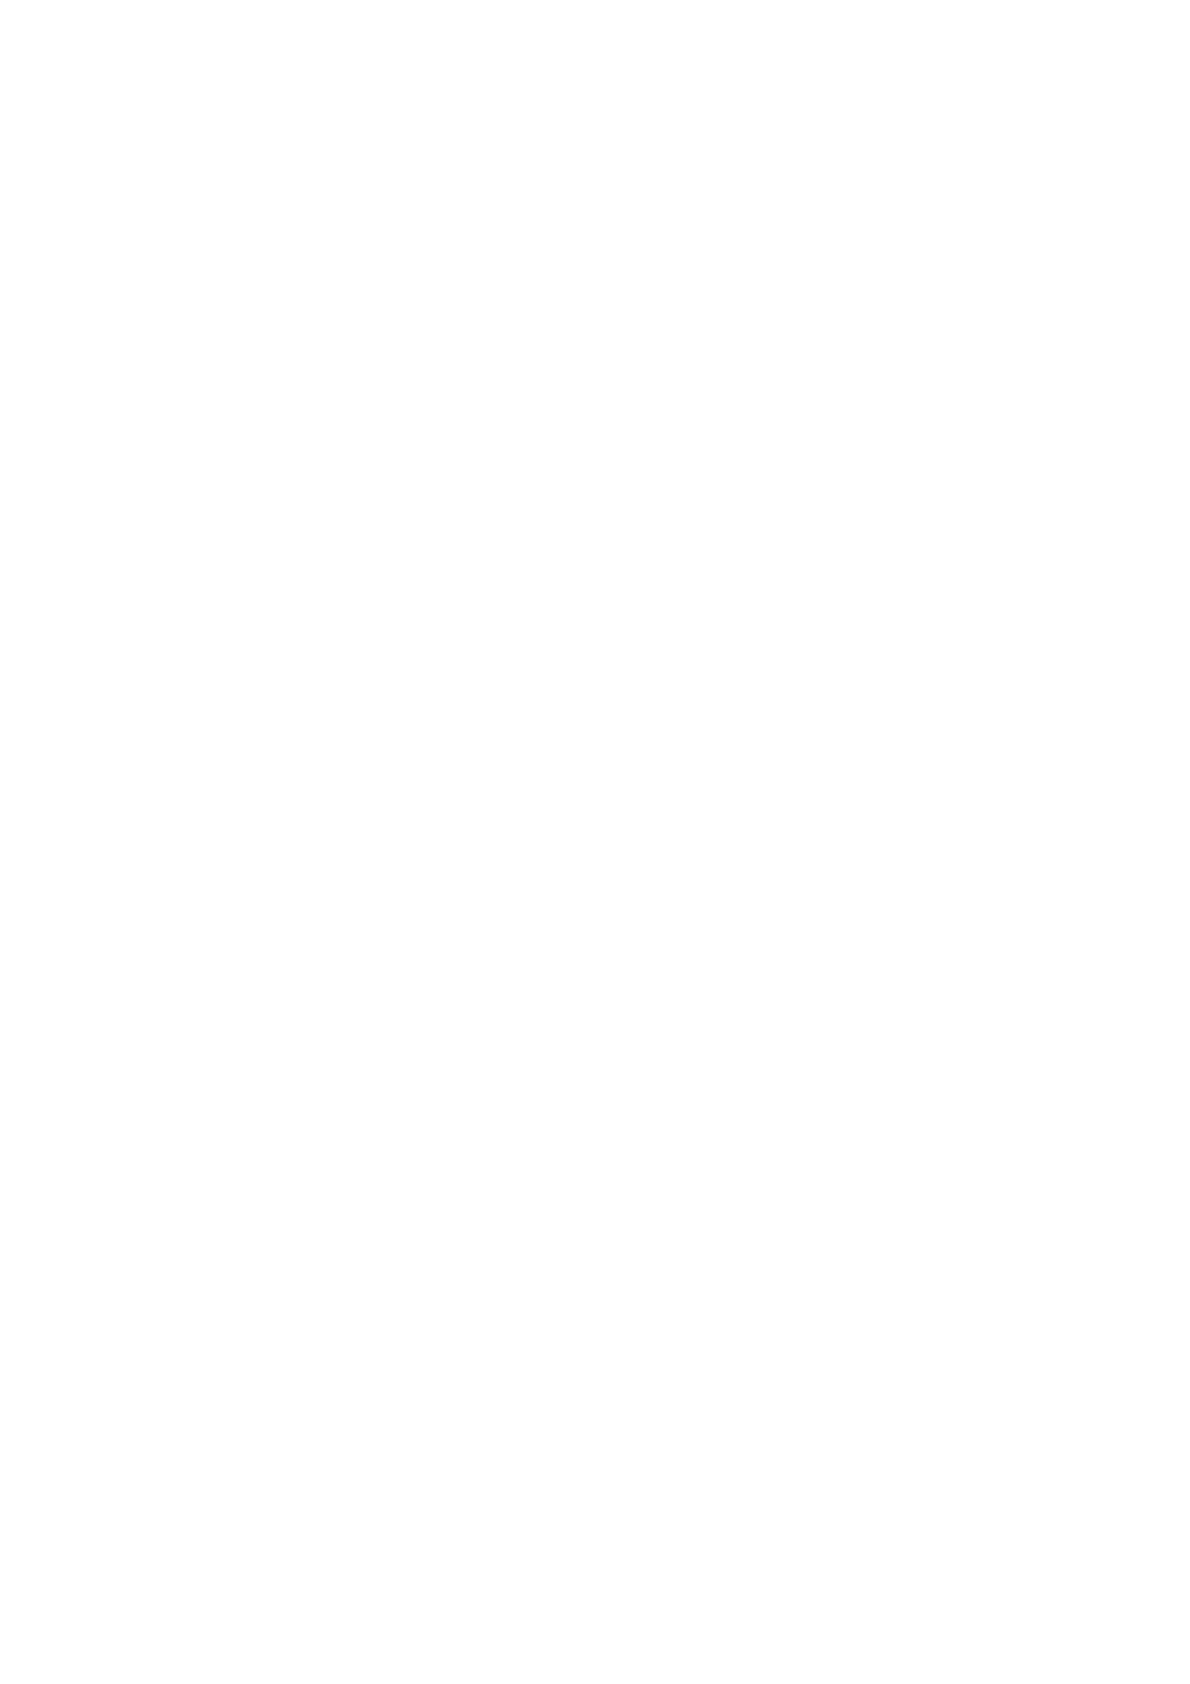 Hawks Nest Logo - HAWK'S NEST – The right way to relax